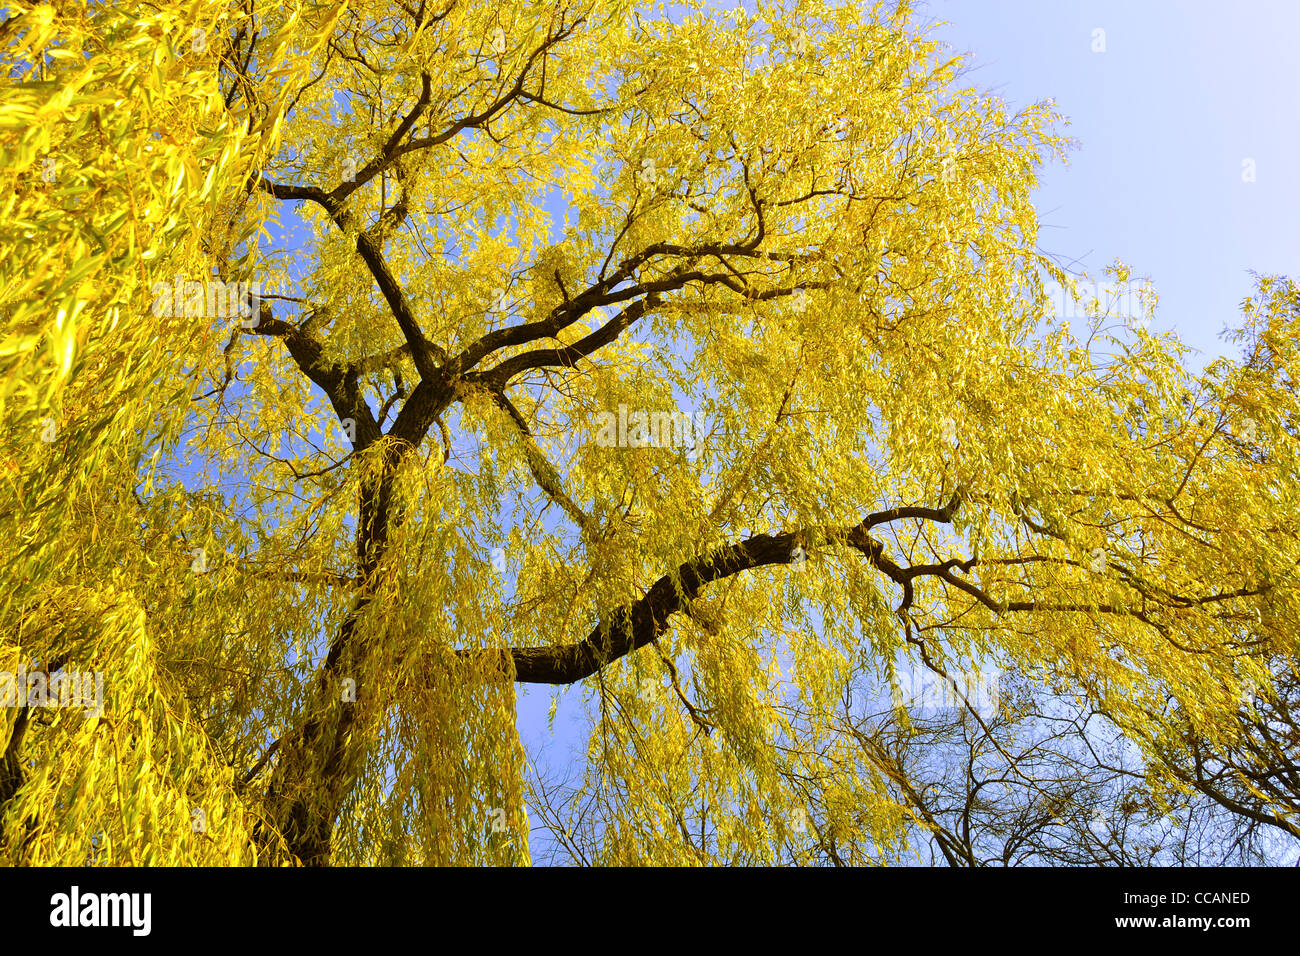 big bright yellow willow tree over blue sky Stock Photo